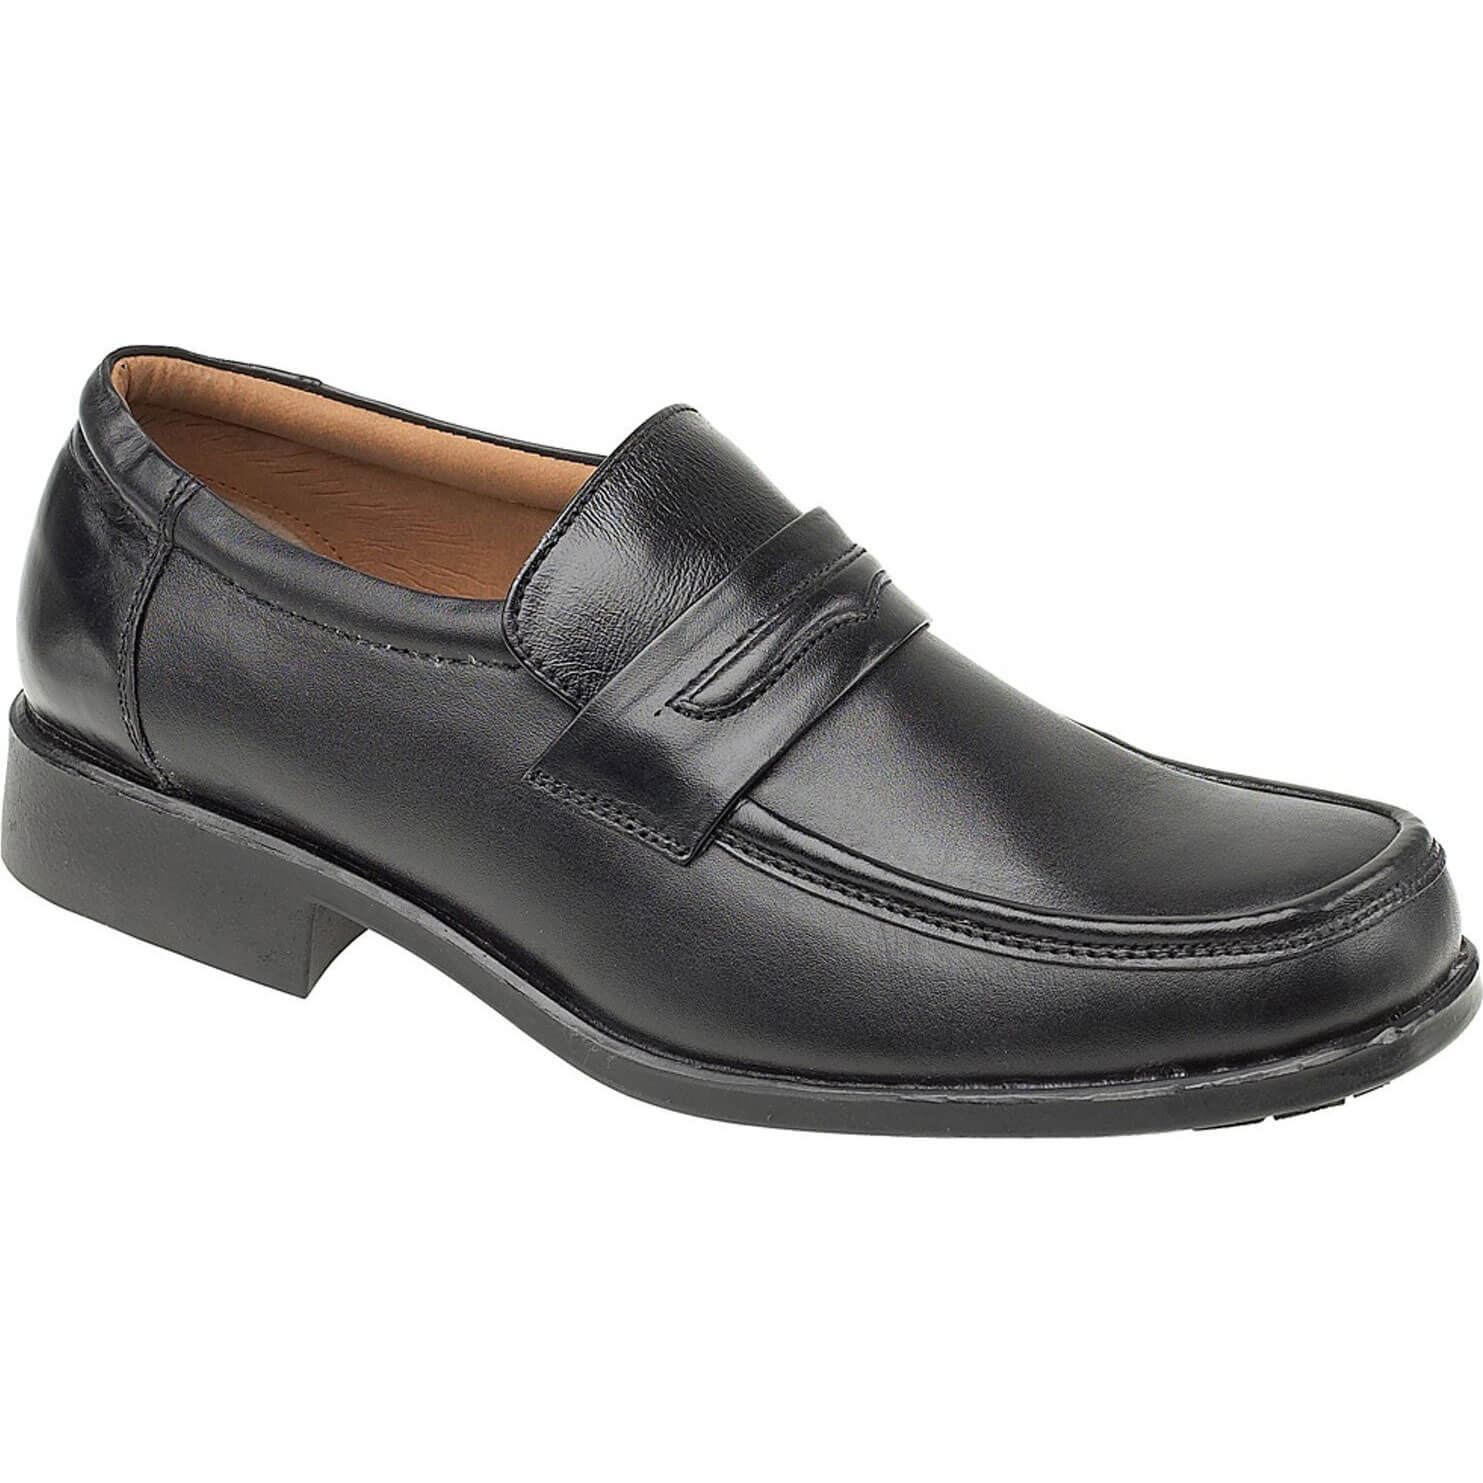 Image of Amblers Manchester Leather Loafer Black Size 6